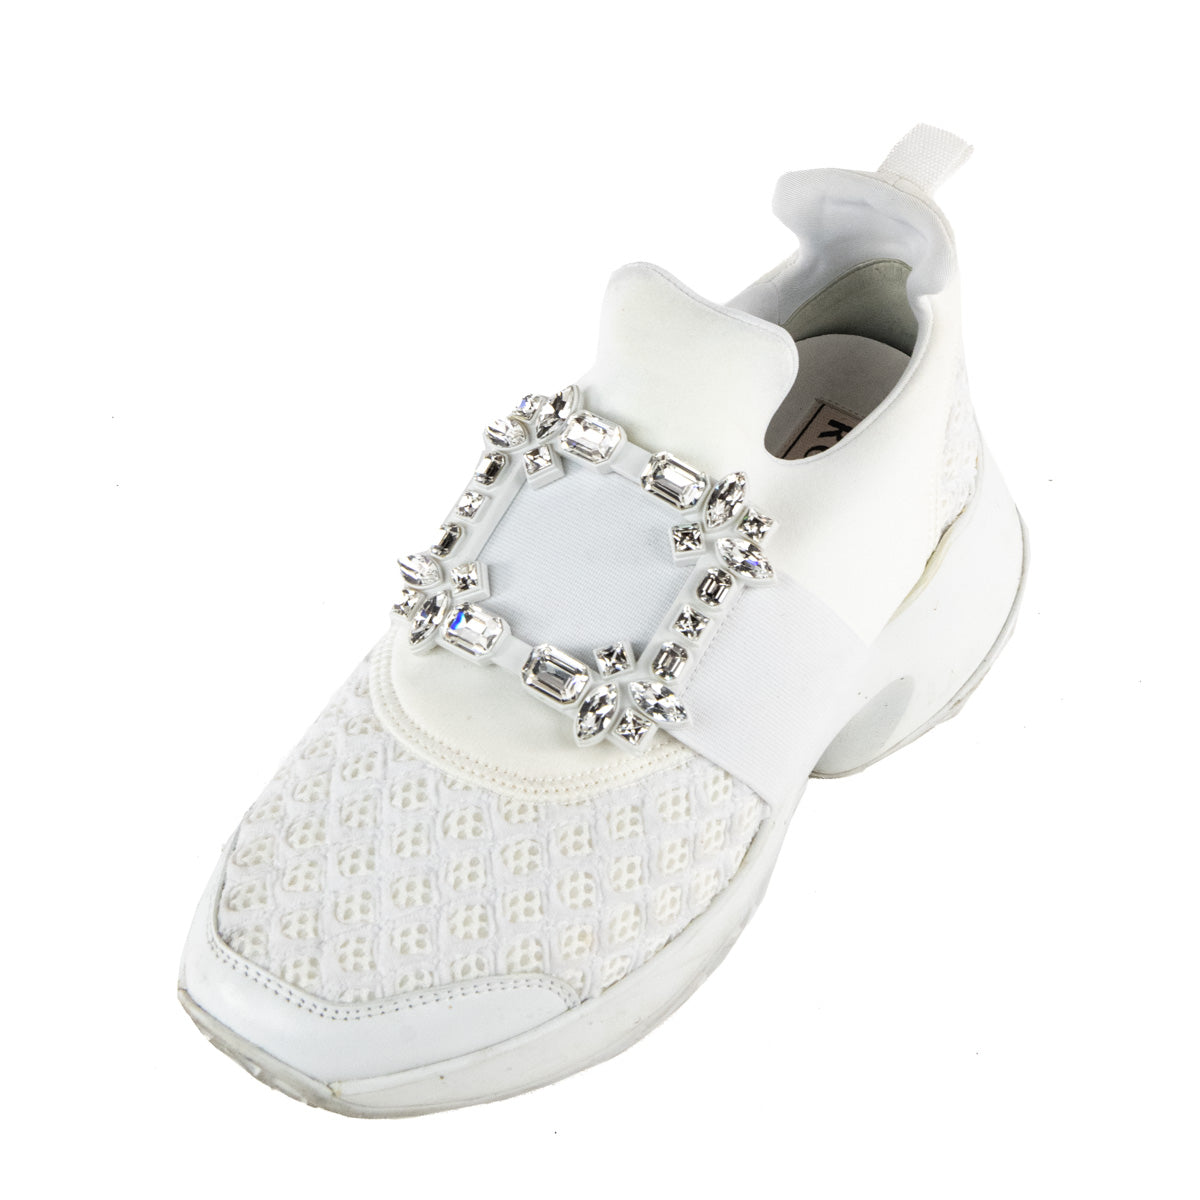 Roger Vivier White Chunky Sneakers Size US 7.5 | EU 37.5 - Love that Bag etc - Preowned Authentic Designer Handbags & Preloved Fashions